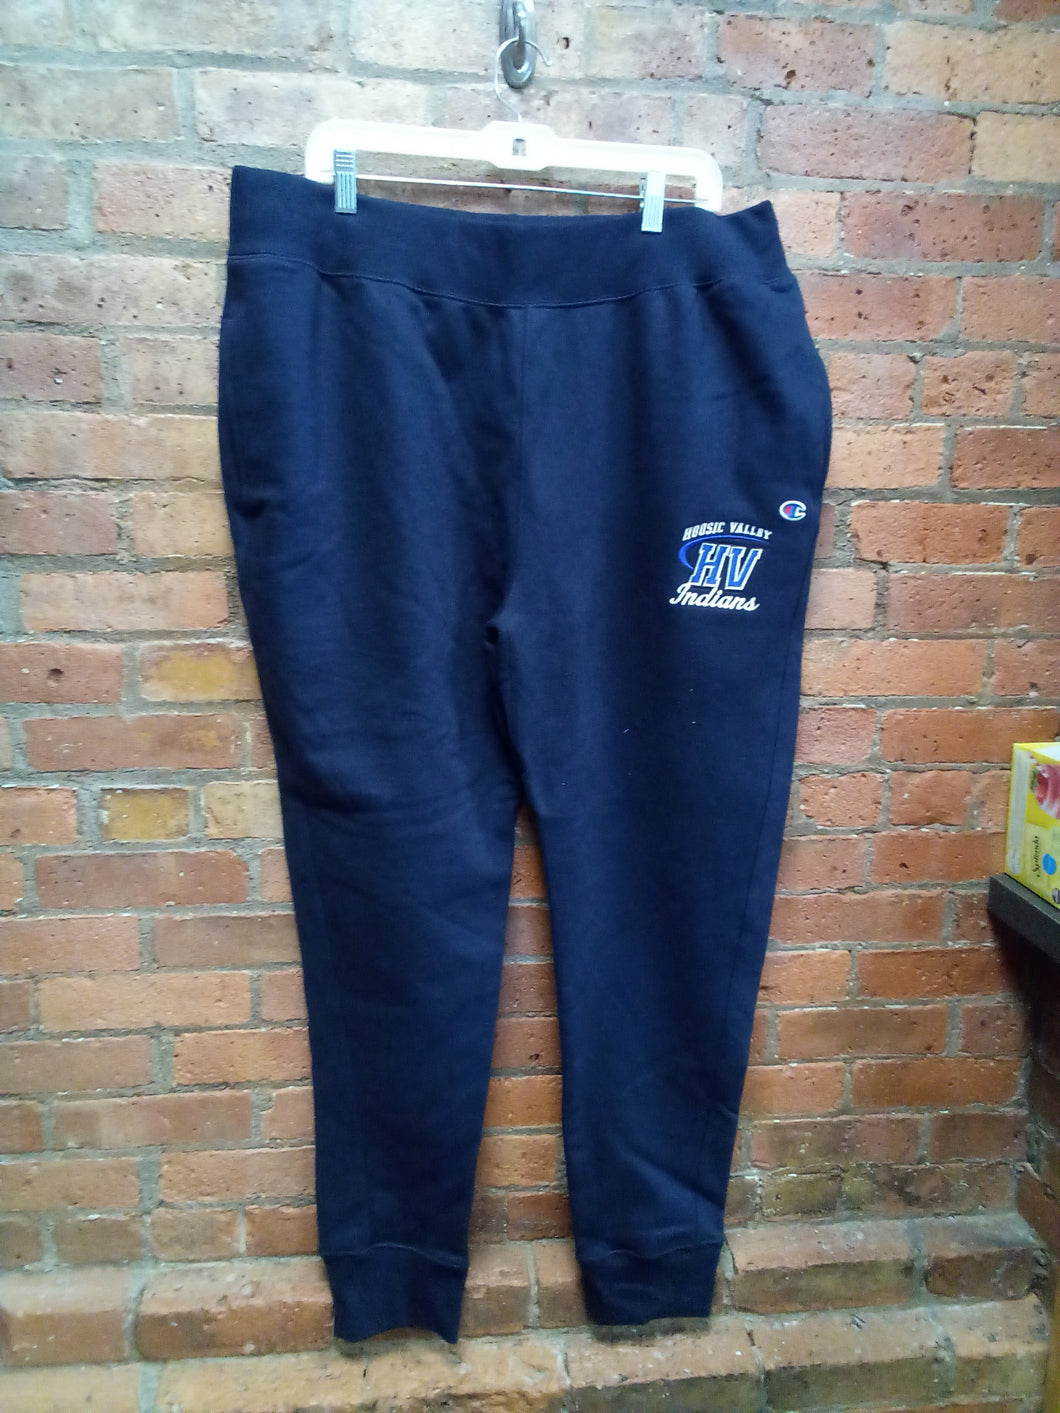 CLEARANCE - Hoosic Valley Indians Champion Joggers - Size 2XL